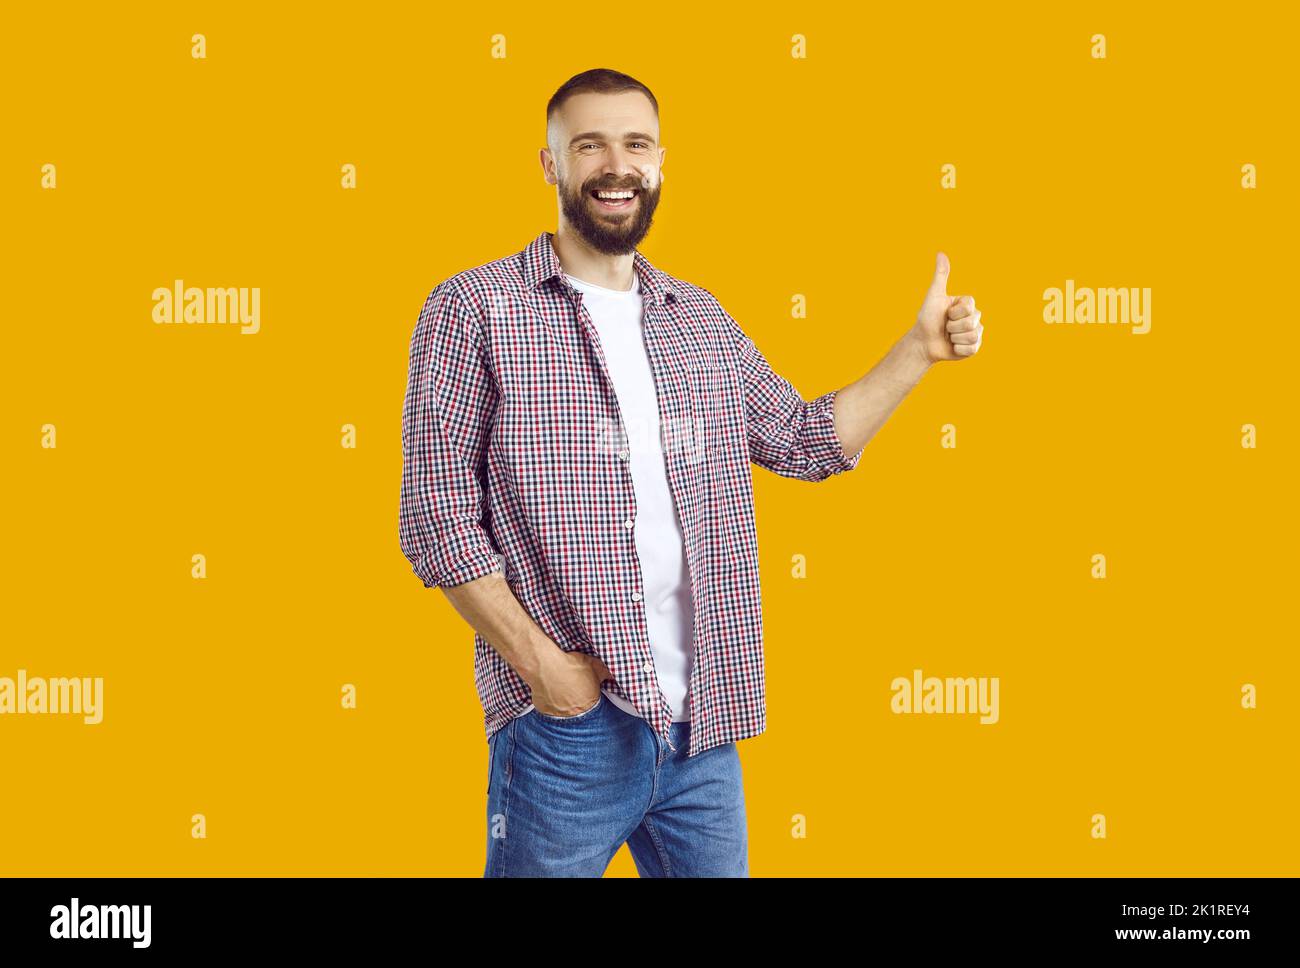 Cheerful young man isolated on orange yellow background smiling and giving thumbs up Stock Photo